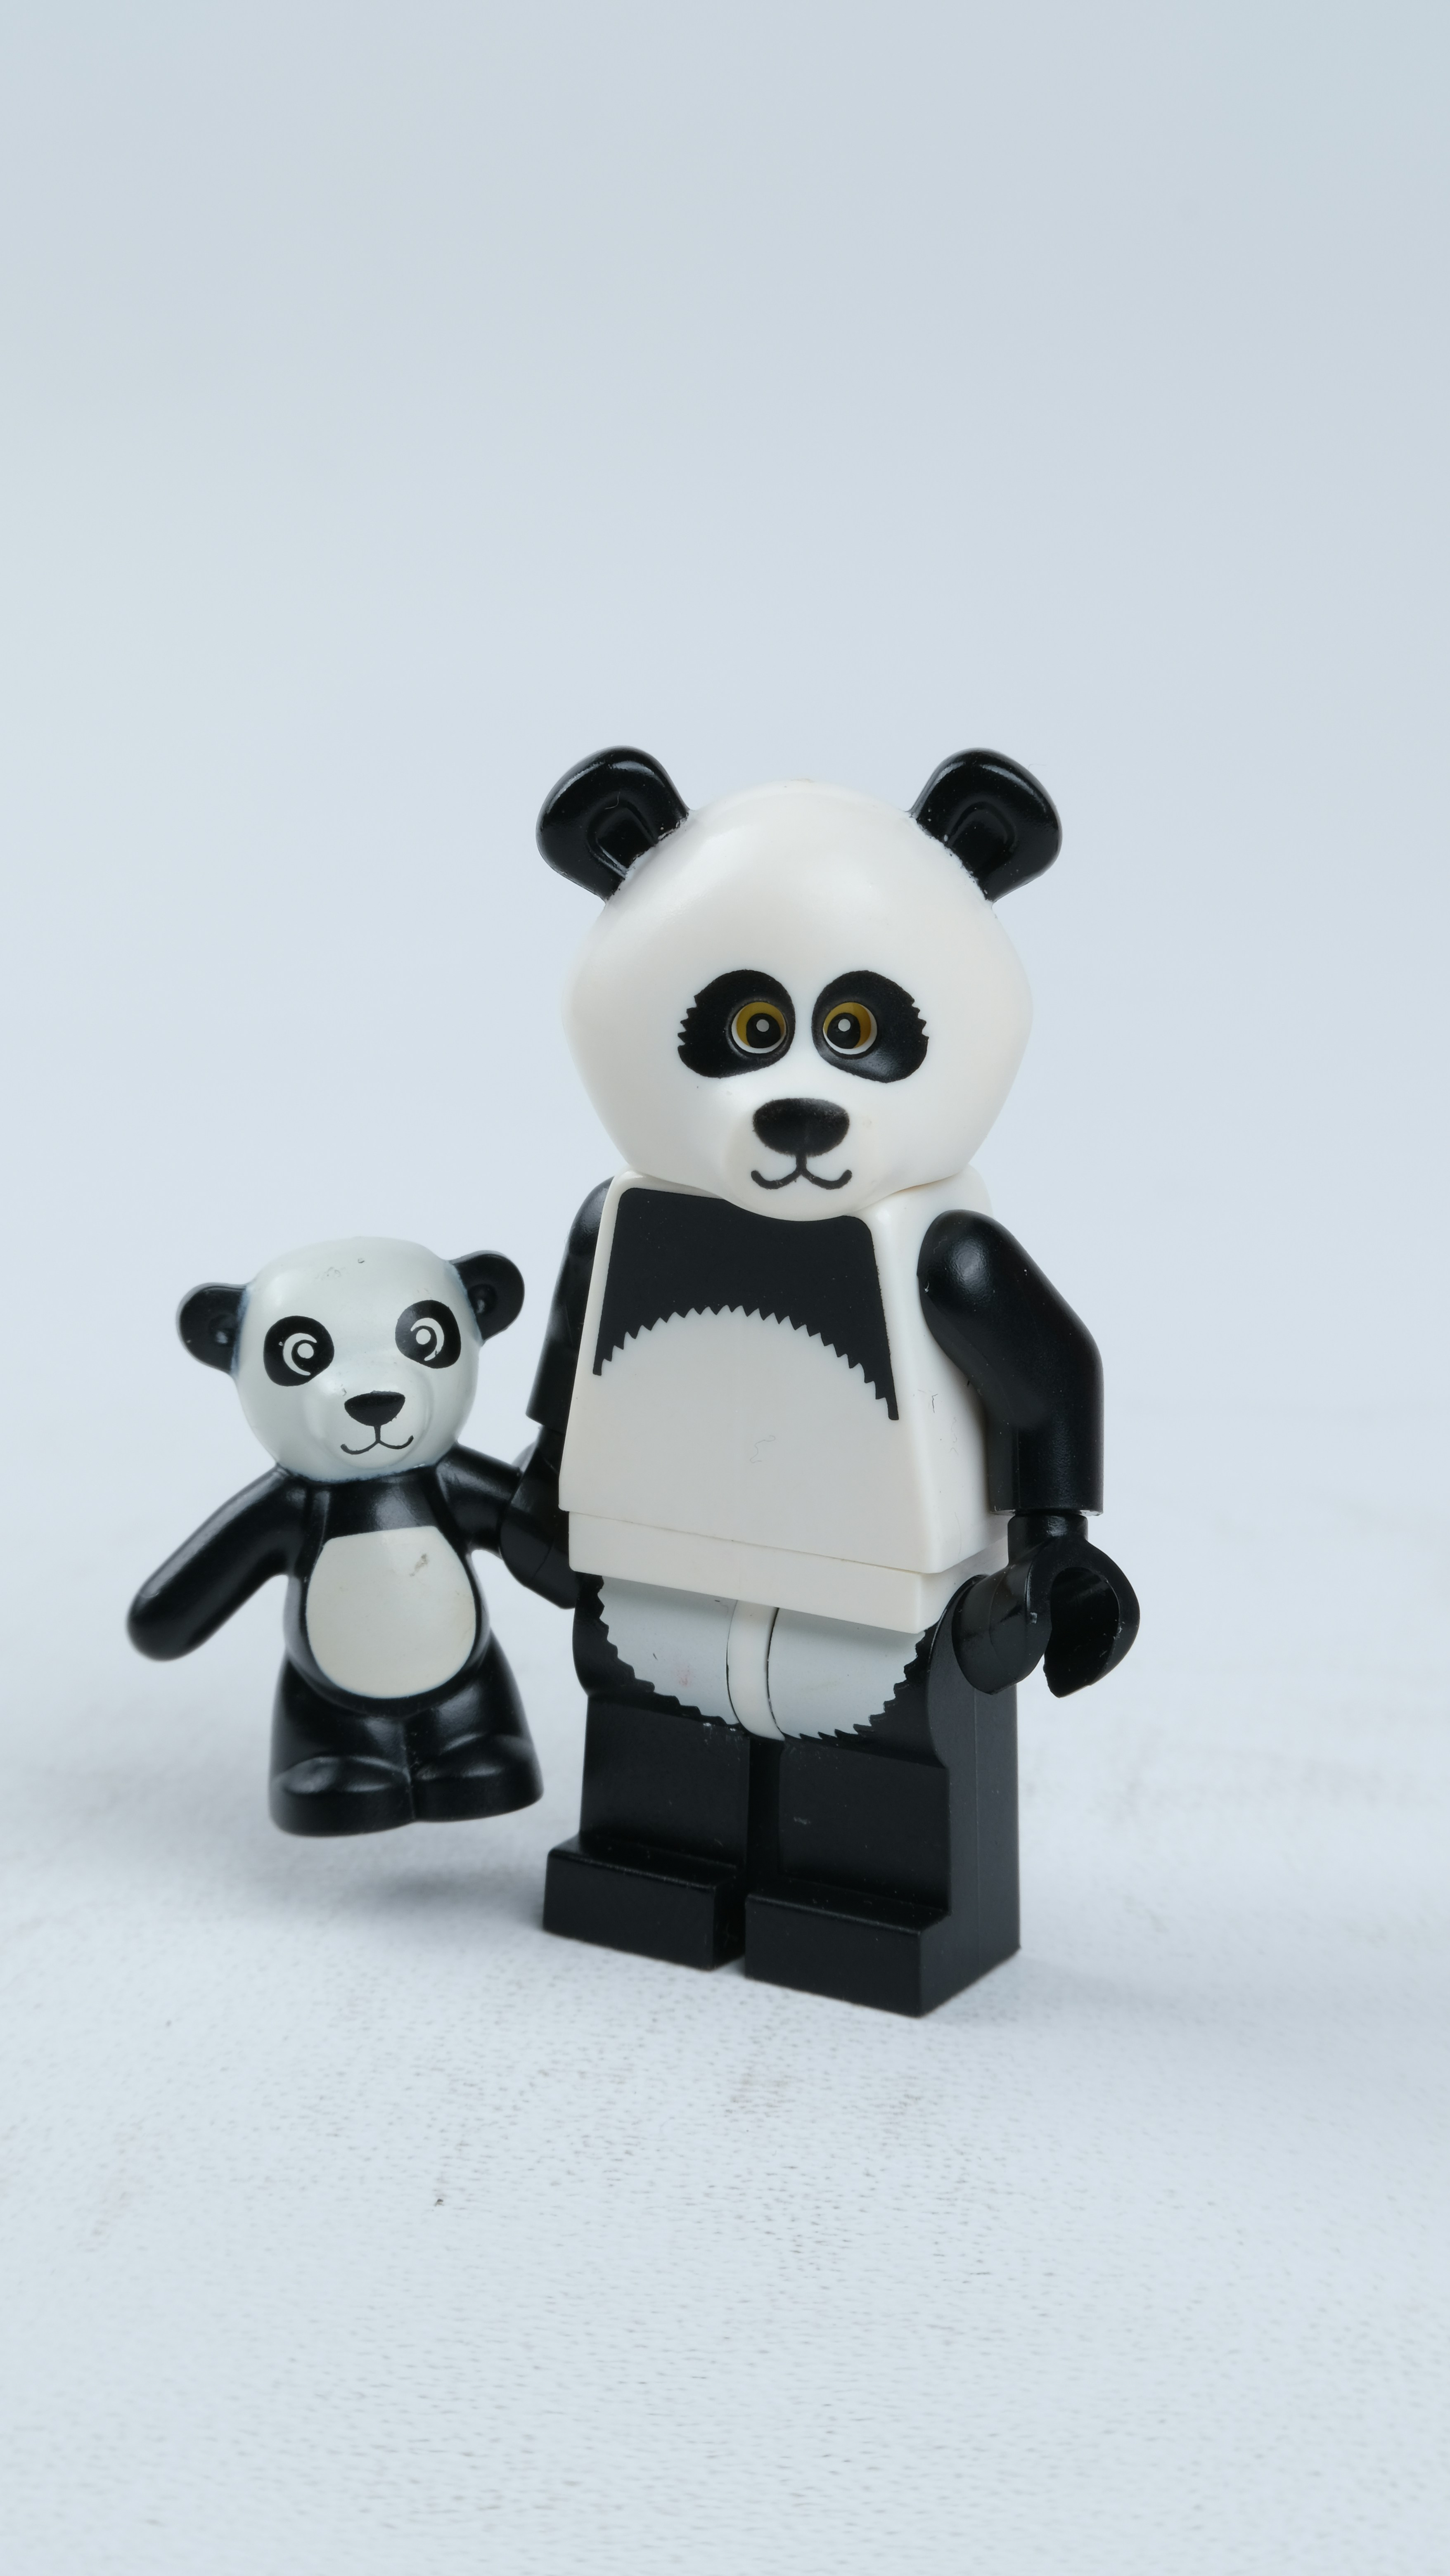 Lego animal panda mother and son or daughter or kid.